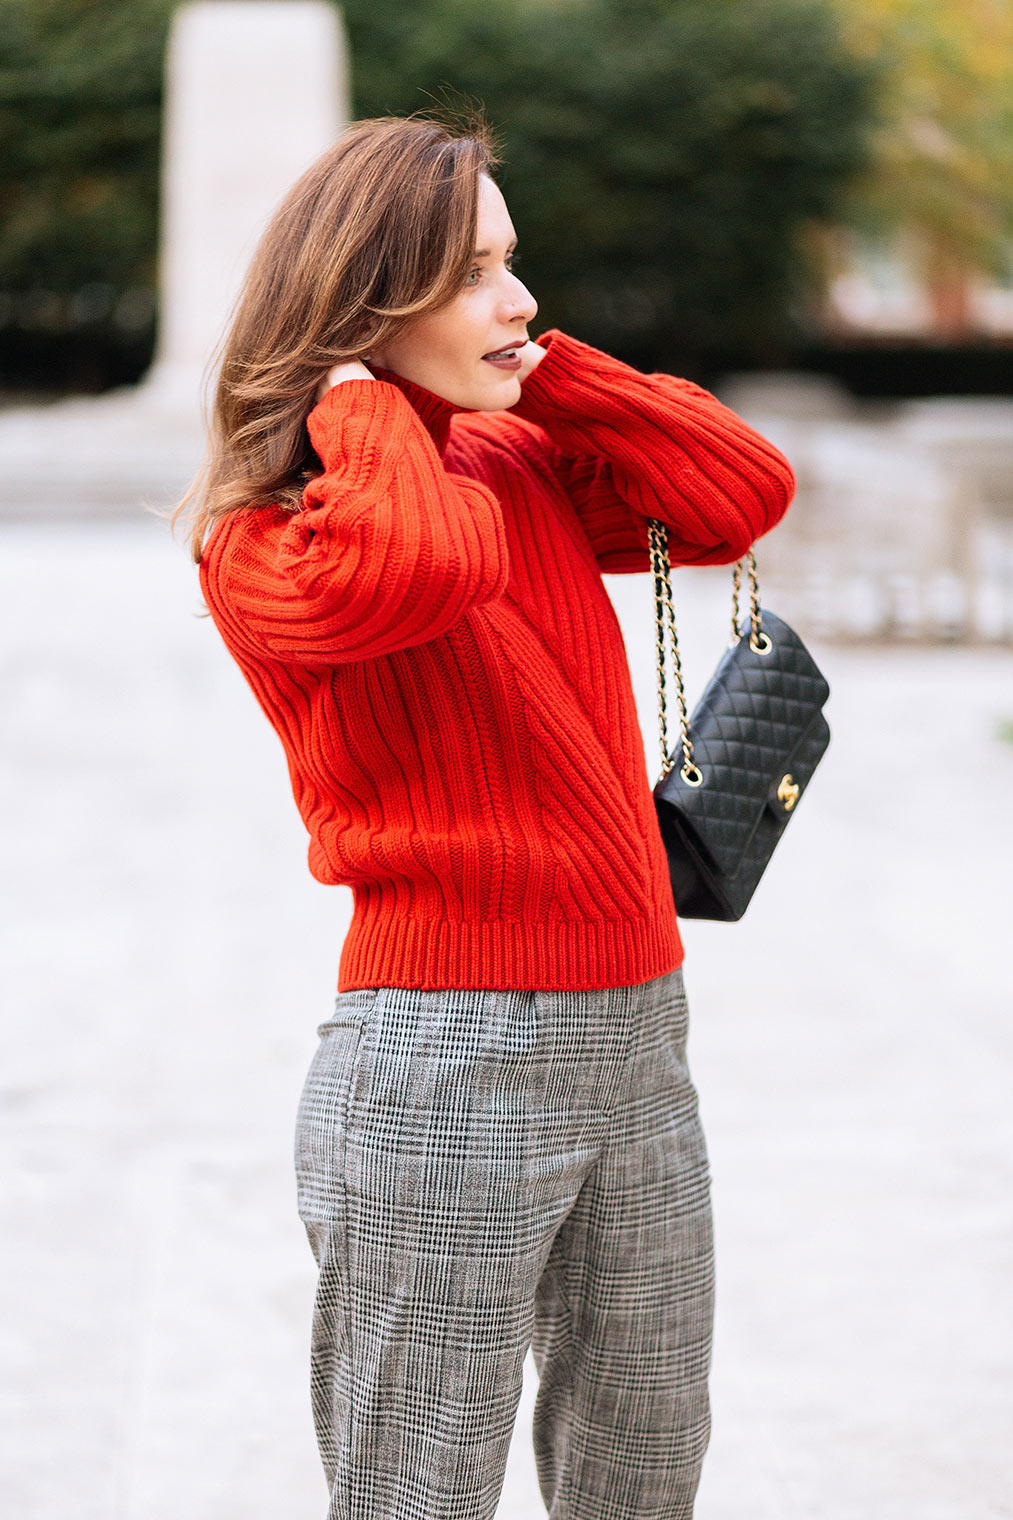 Thick red sweater ideal for winter